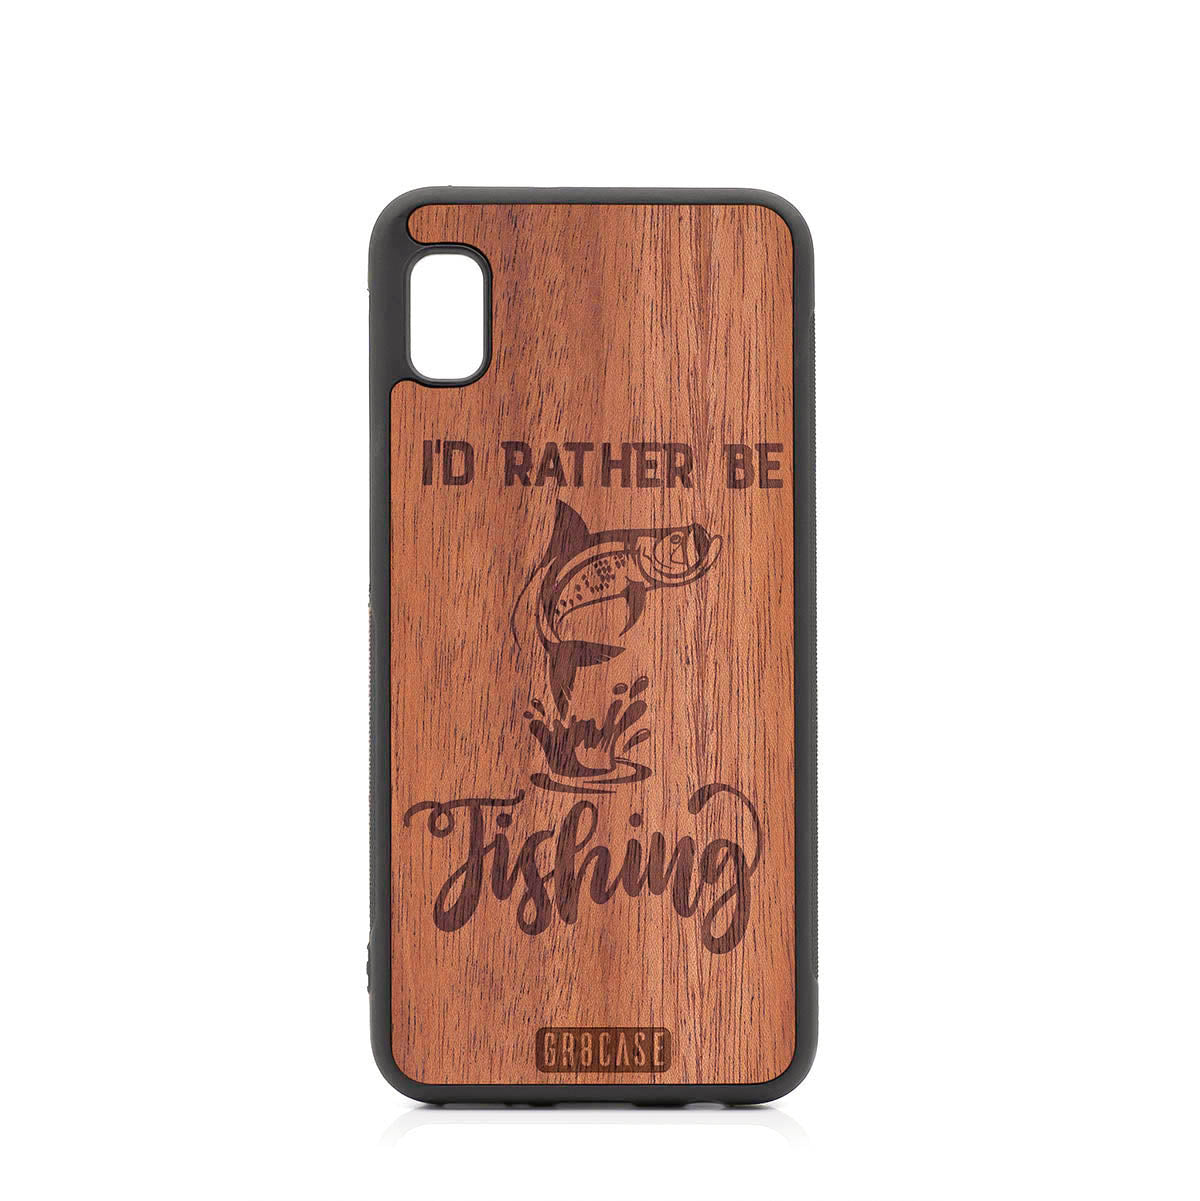 I'D Rather Be Fishing Design Wood Case For Samsung Galaxy A10E